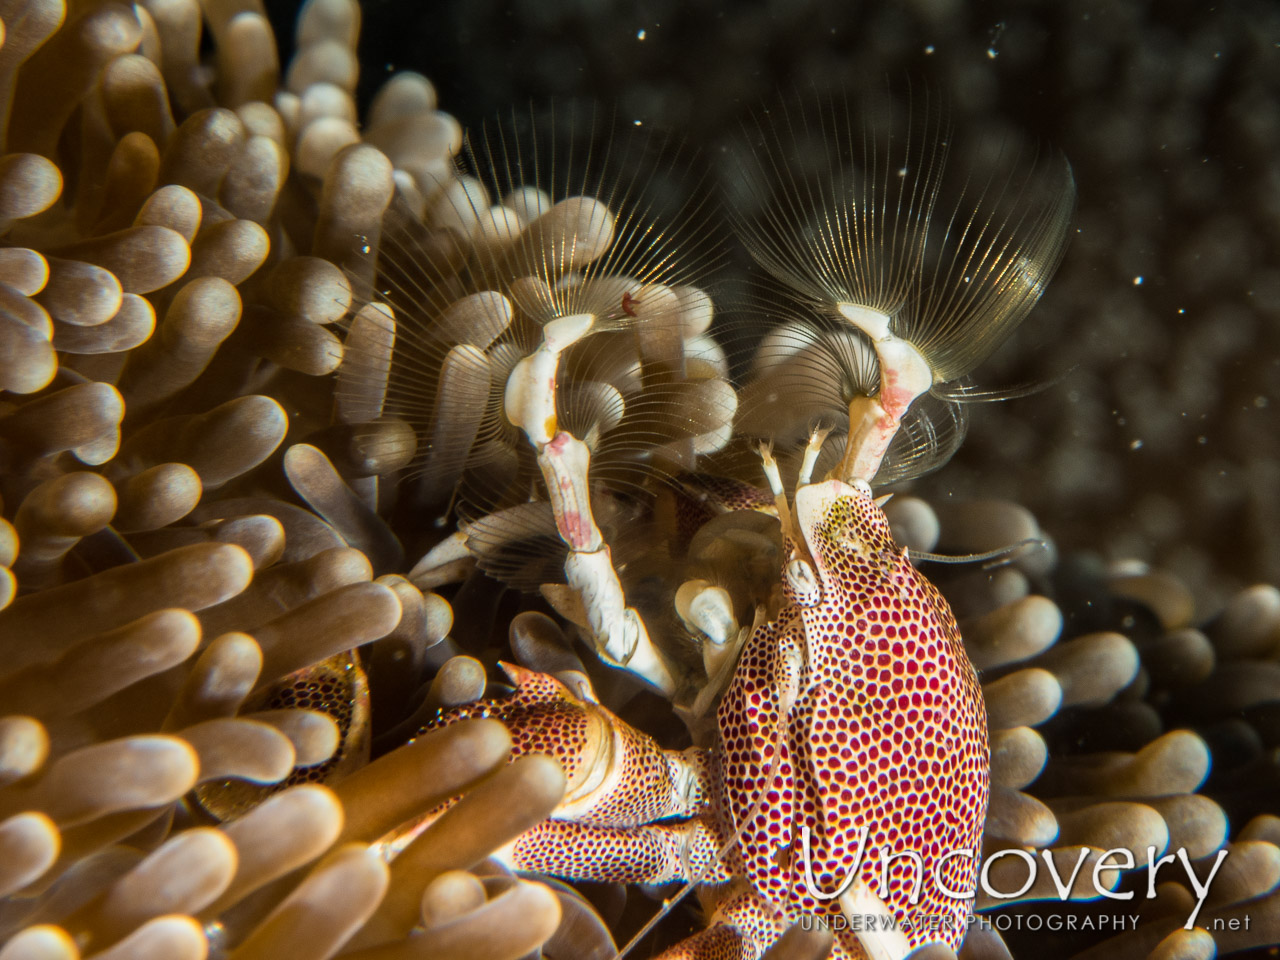 Spotted Porcelain Crab (neopetrolisthes Maculatus), photo taken in Maldives, Male Atoll, South Male Atoll, Cocoa Corner